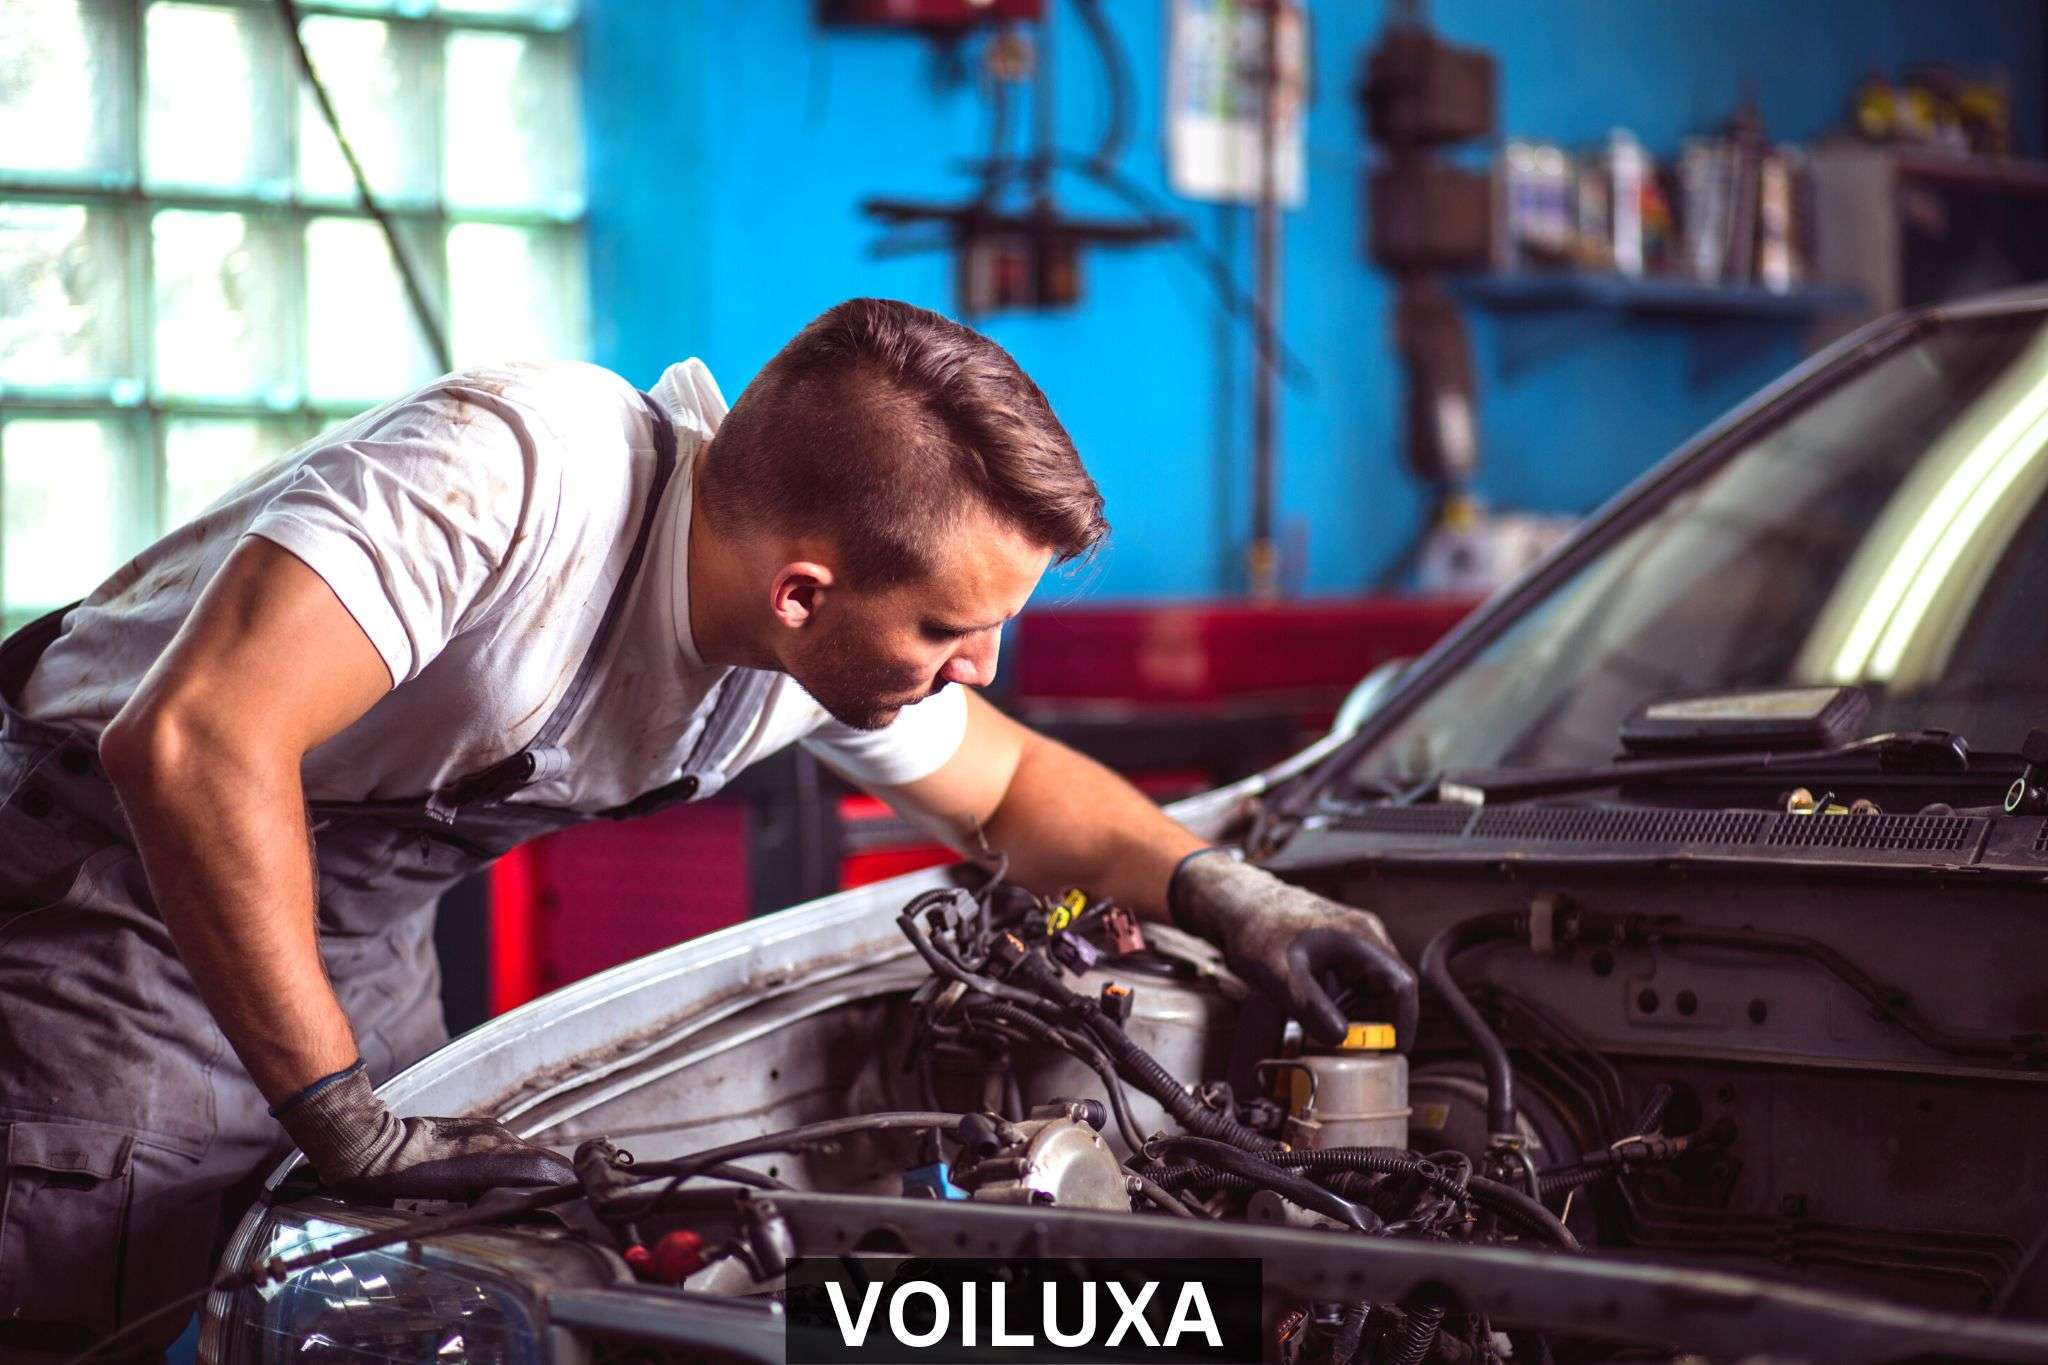 10 Tips For Maintaining and Repairing a Vehicle